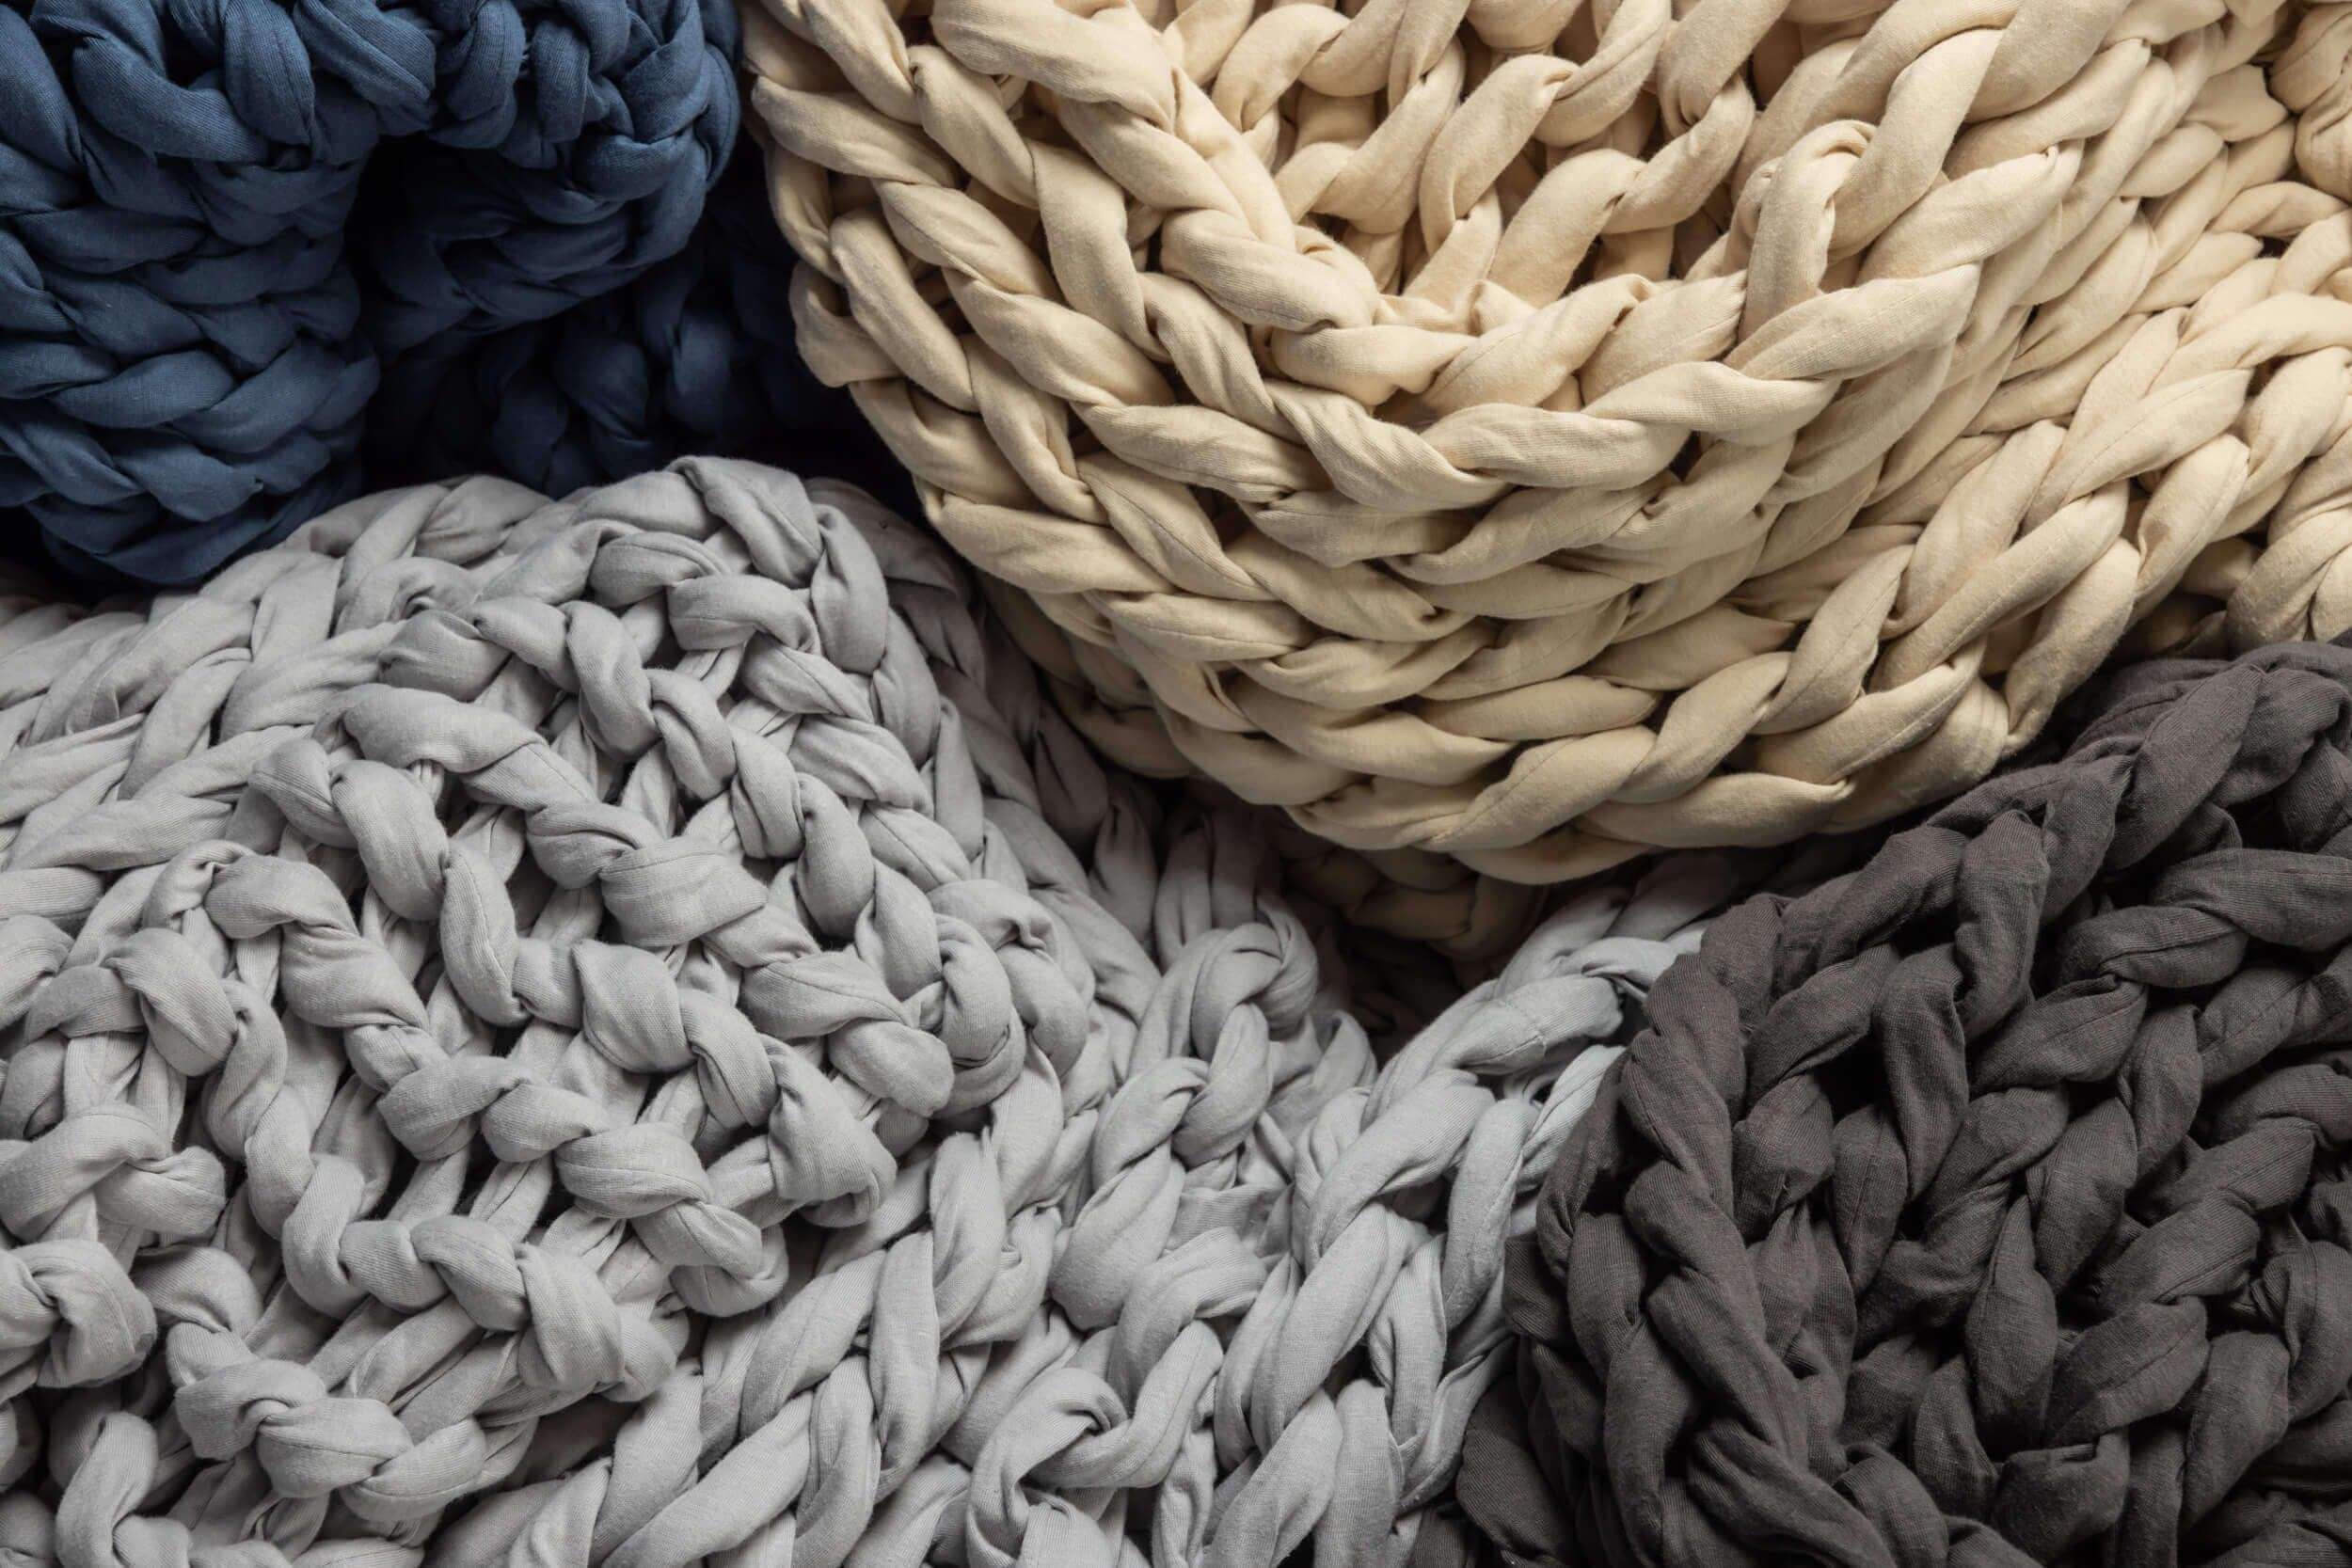 Close up of the four available Douglas Hand Knit Weighted Blanket colours: Dark Grey, Light Grey, Navy, and Cream